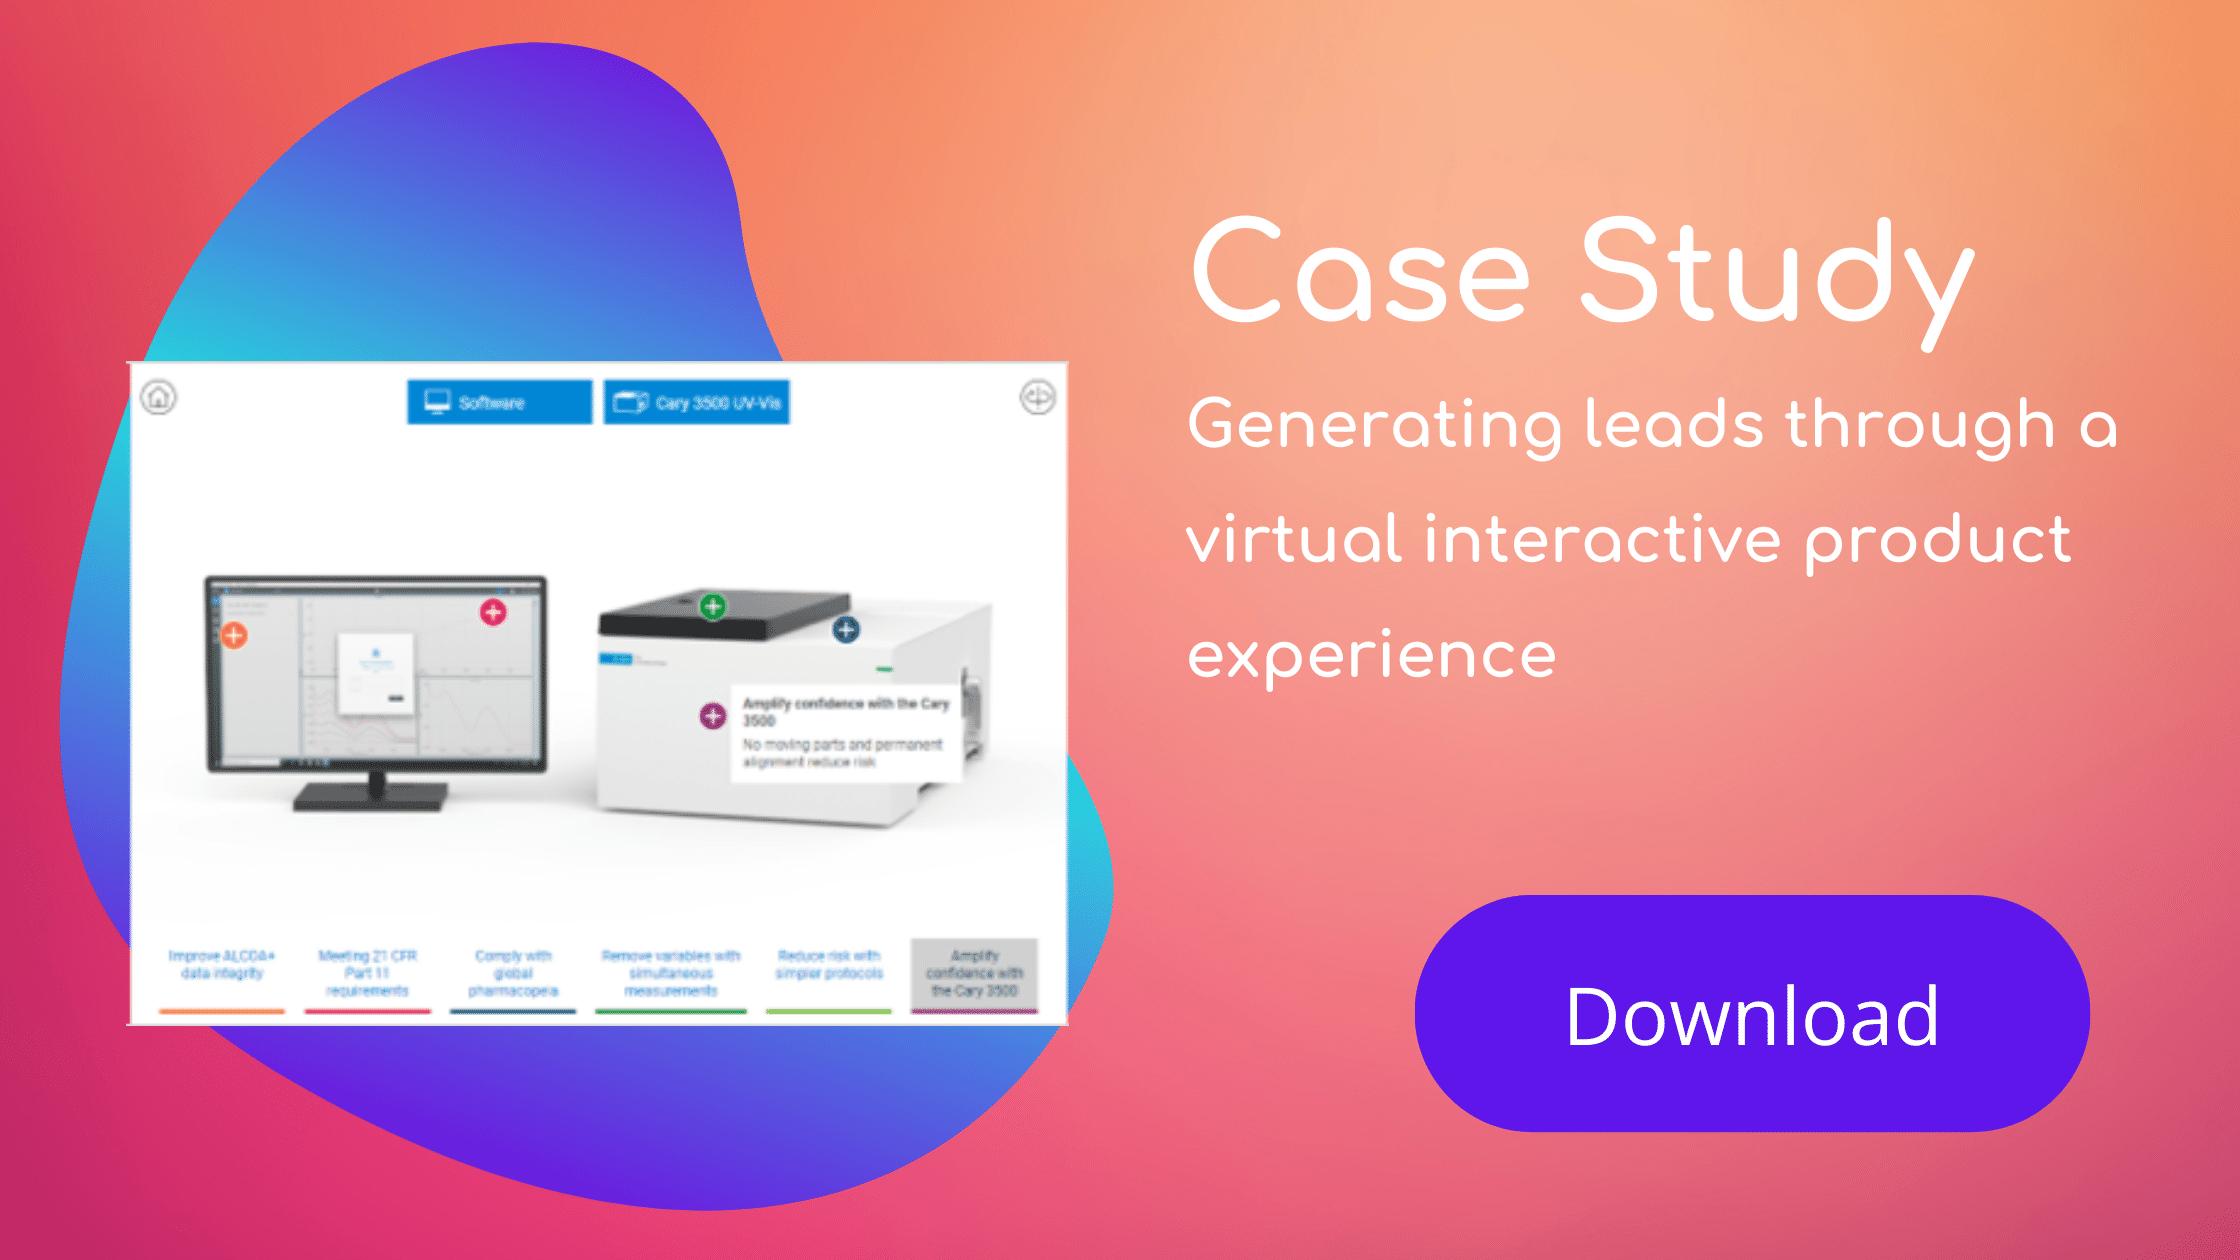 Generating leads through a virtual interactive product experience